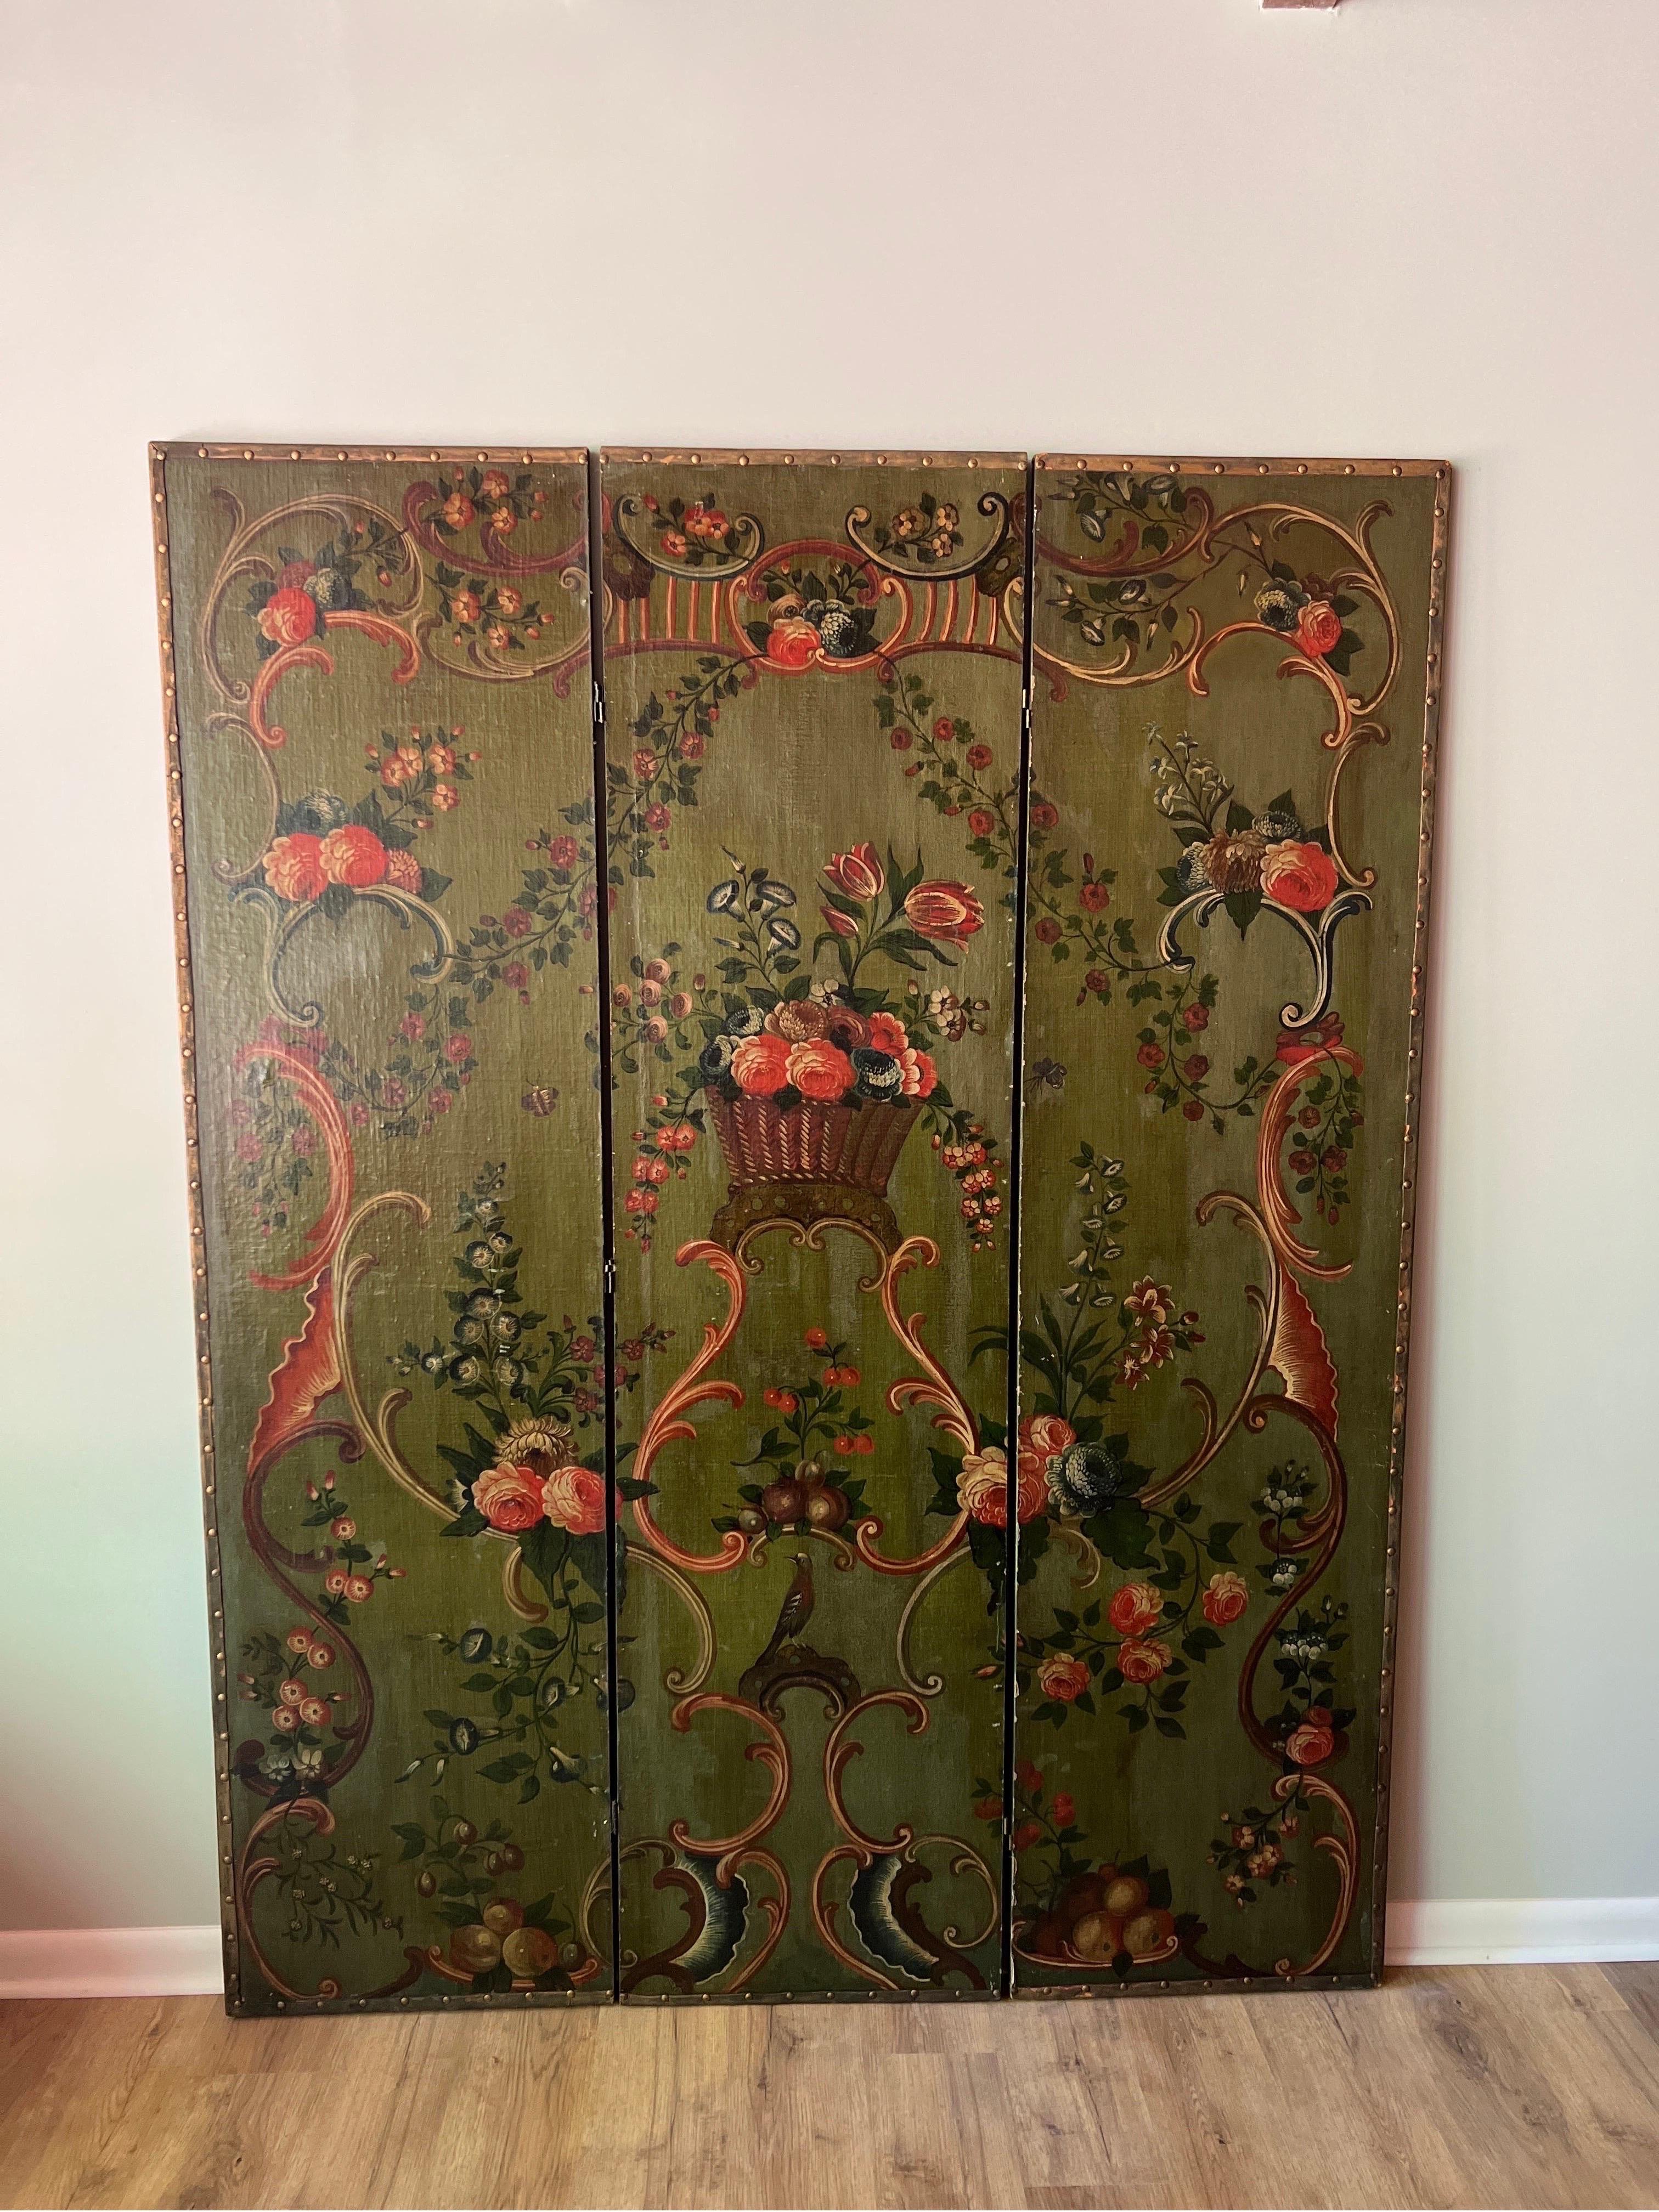 Antique 19th century Italian Floral Painted 3 panel folding floor screen / room divider.
The screen has been expertly painted by an Italian school artist. Decorated with floral and foliate images, a Rococo influence with scroll work to the edges.